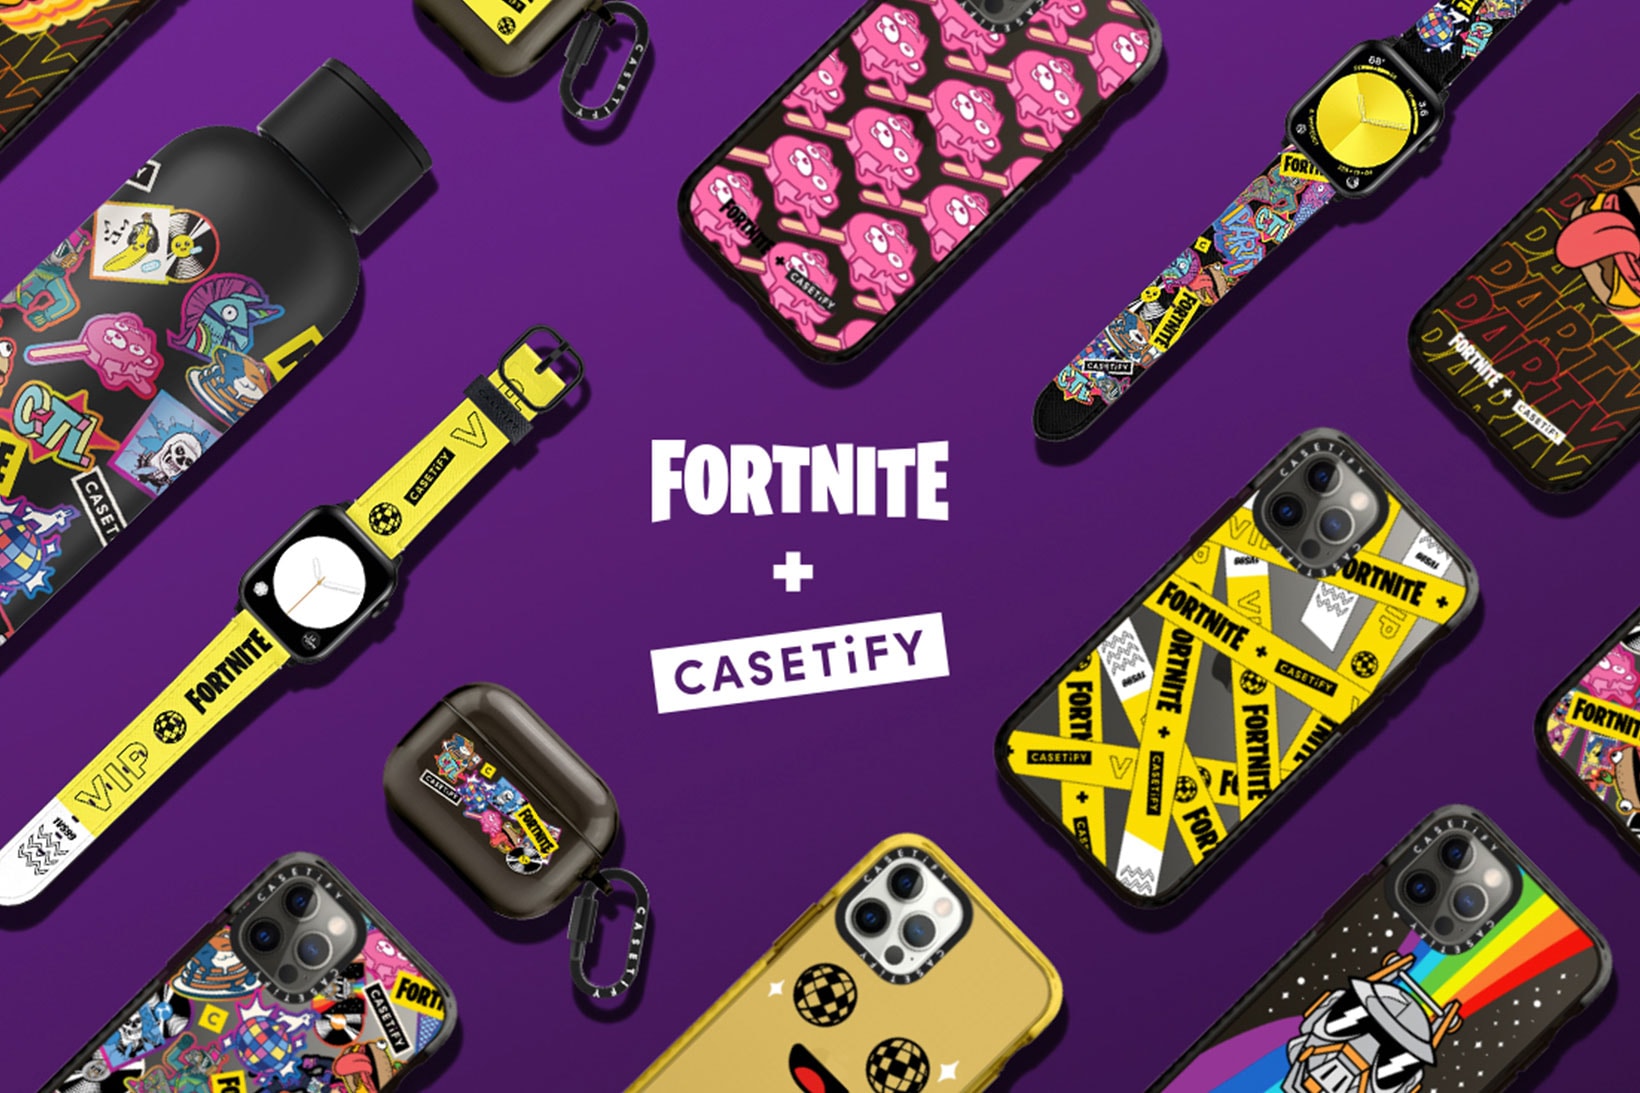 casetify fortnite epic games collaboration iphone cases apple watch